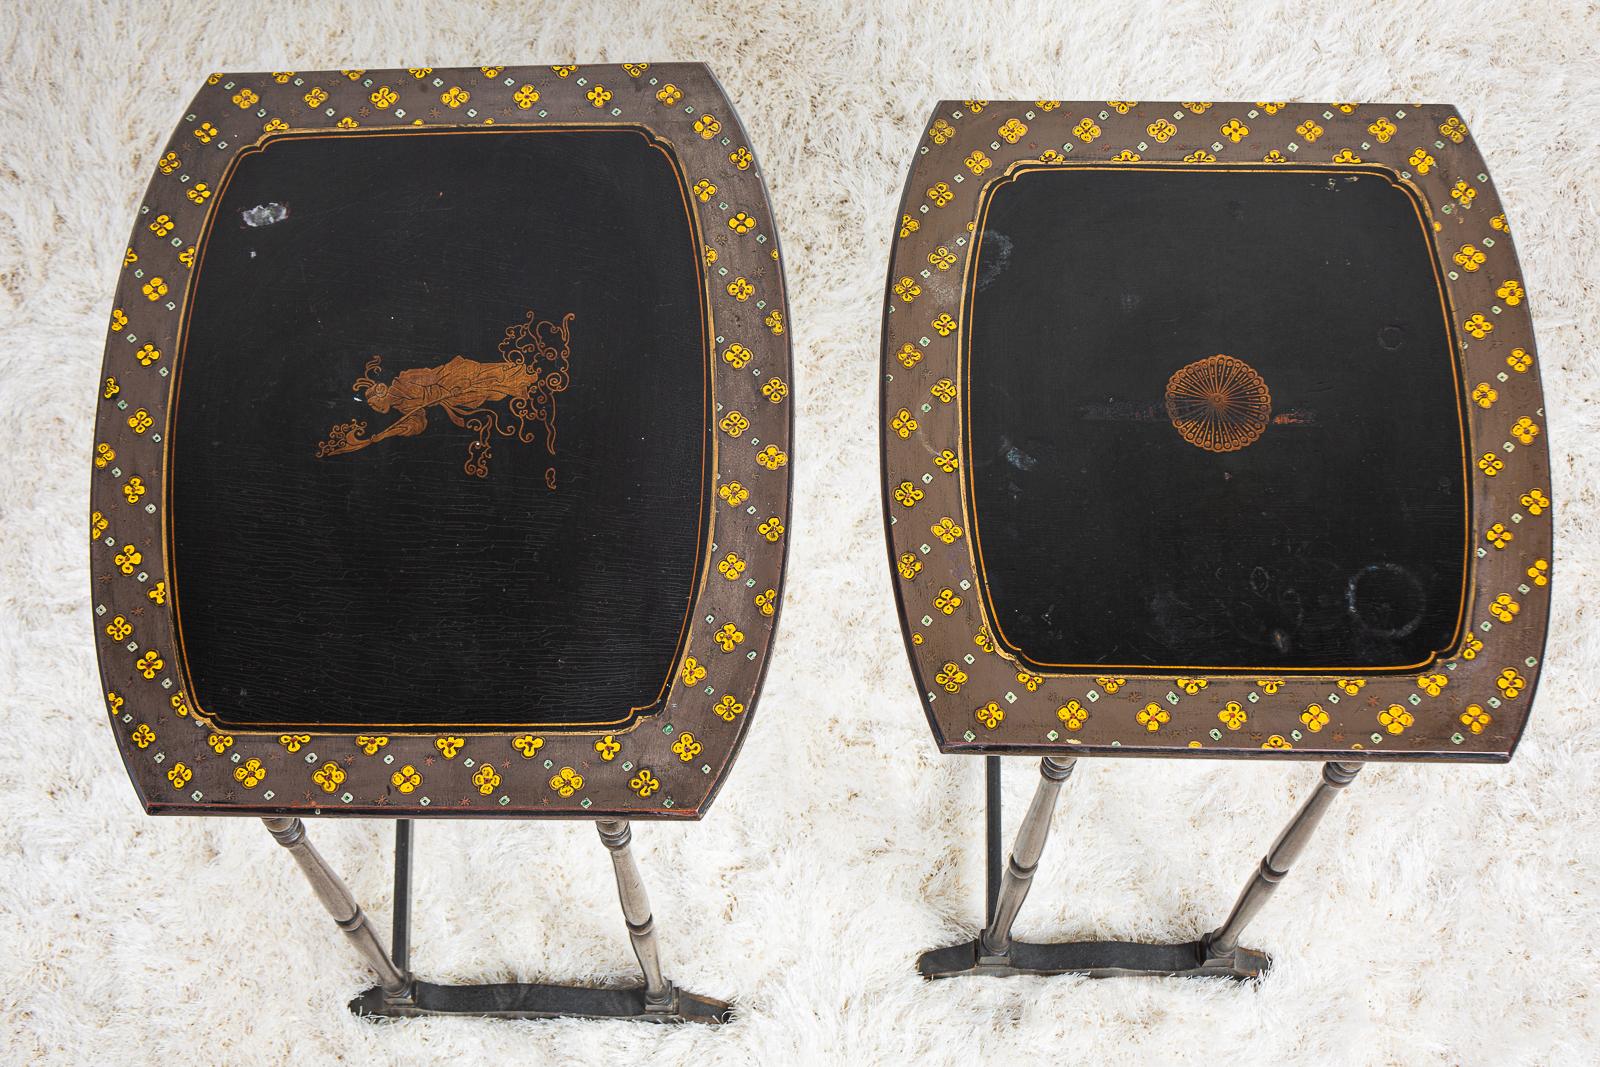 Lacquer English Regency Chinoiserie Nesting Tables